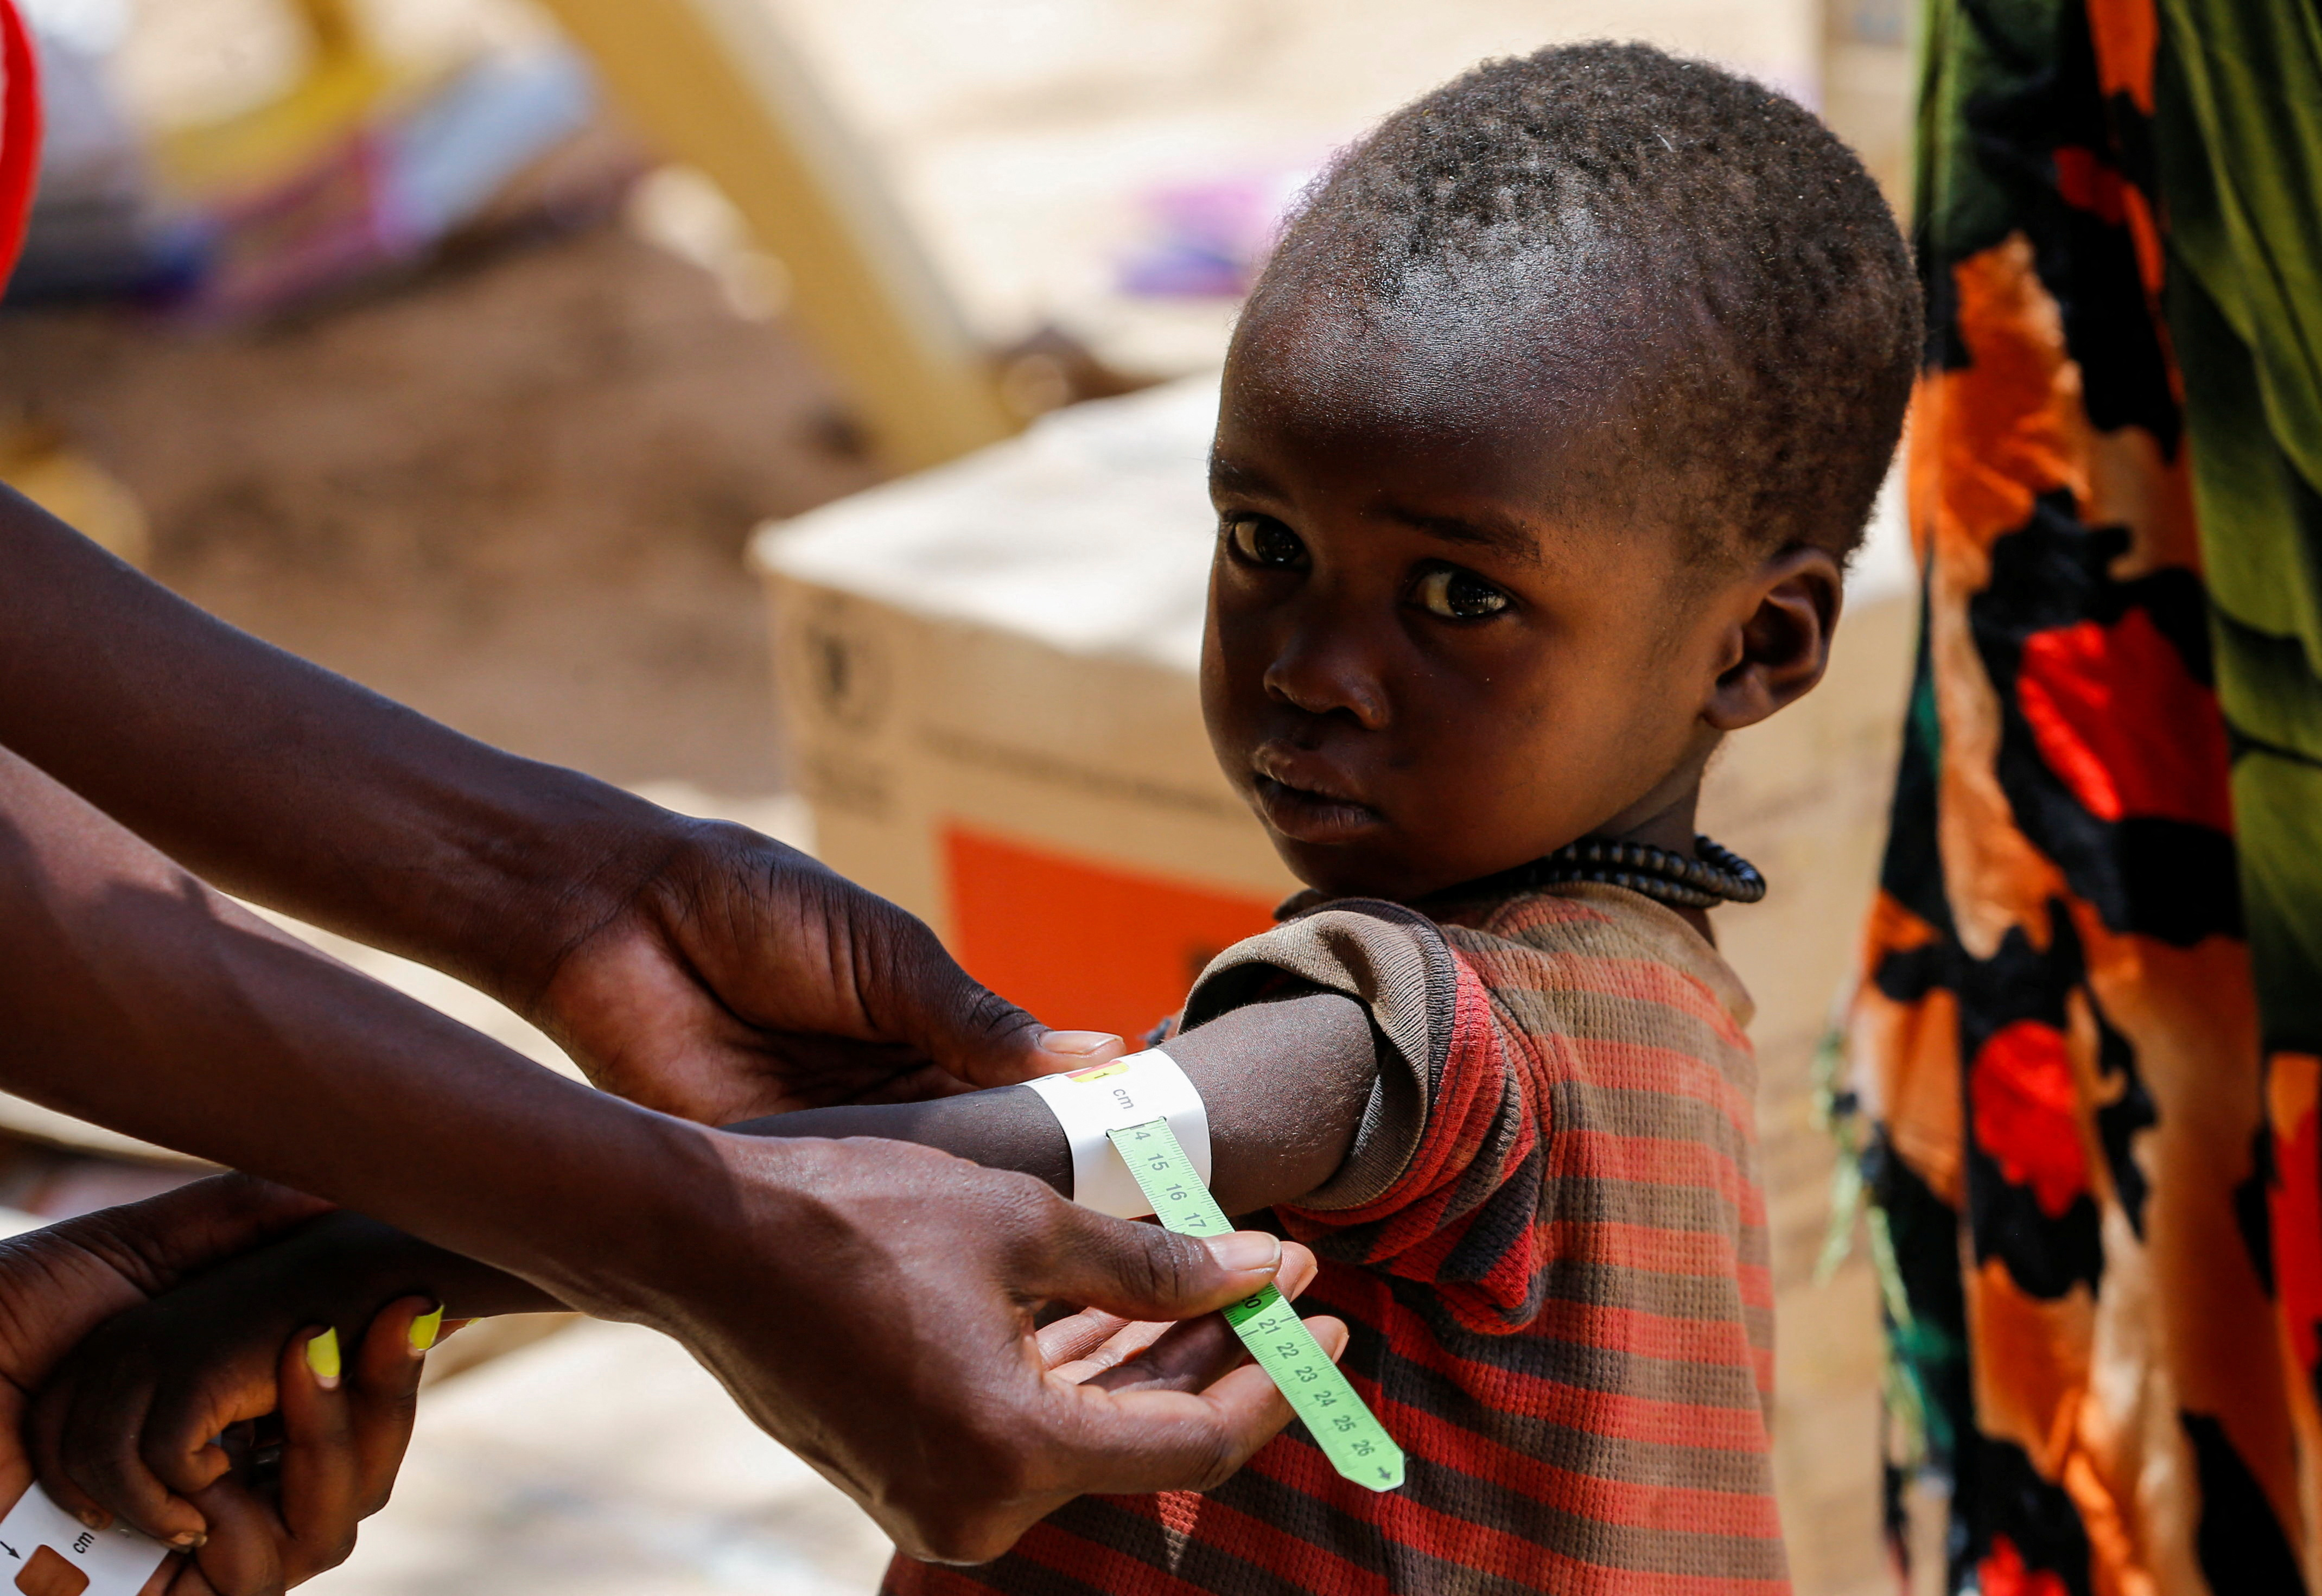 A child from the Turkana pastoralist community affected by the worsening drought due to failed rain seasons, is examined for malnutrition at an integrated outreach medical clinic in Kakimat village in Turkana